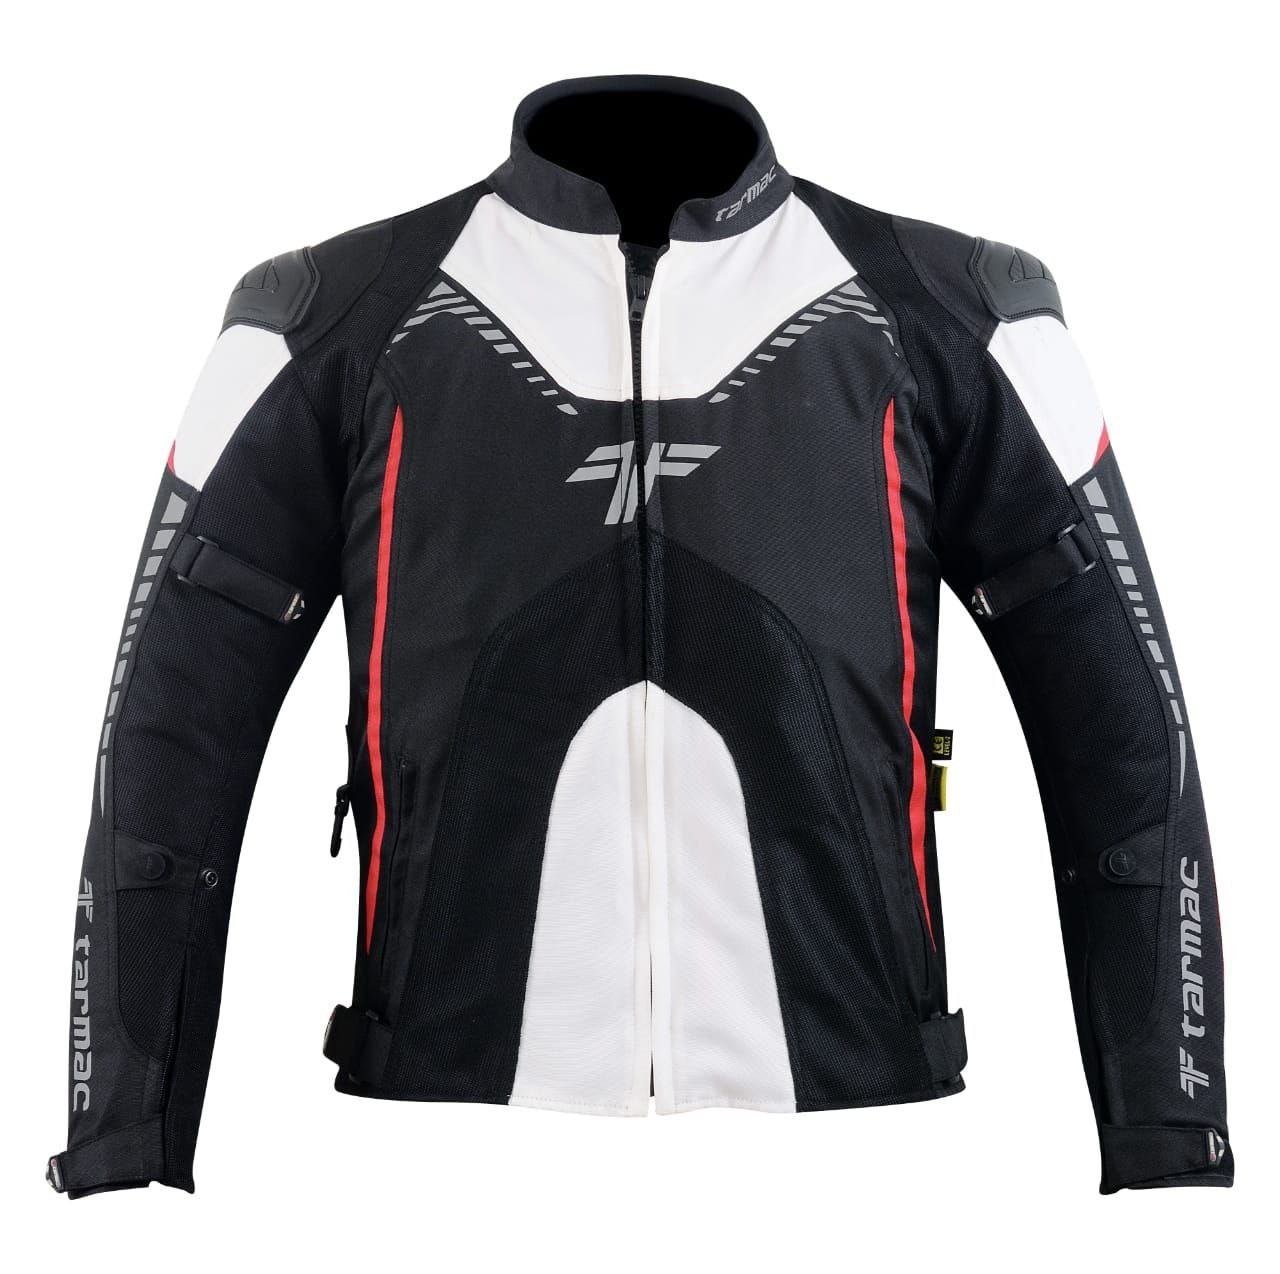 Tarmac Corsa Black/White/Red Level 2 Riding Jacket PU chest protectors ...